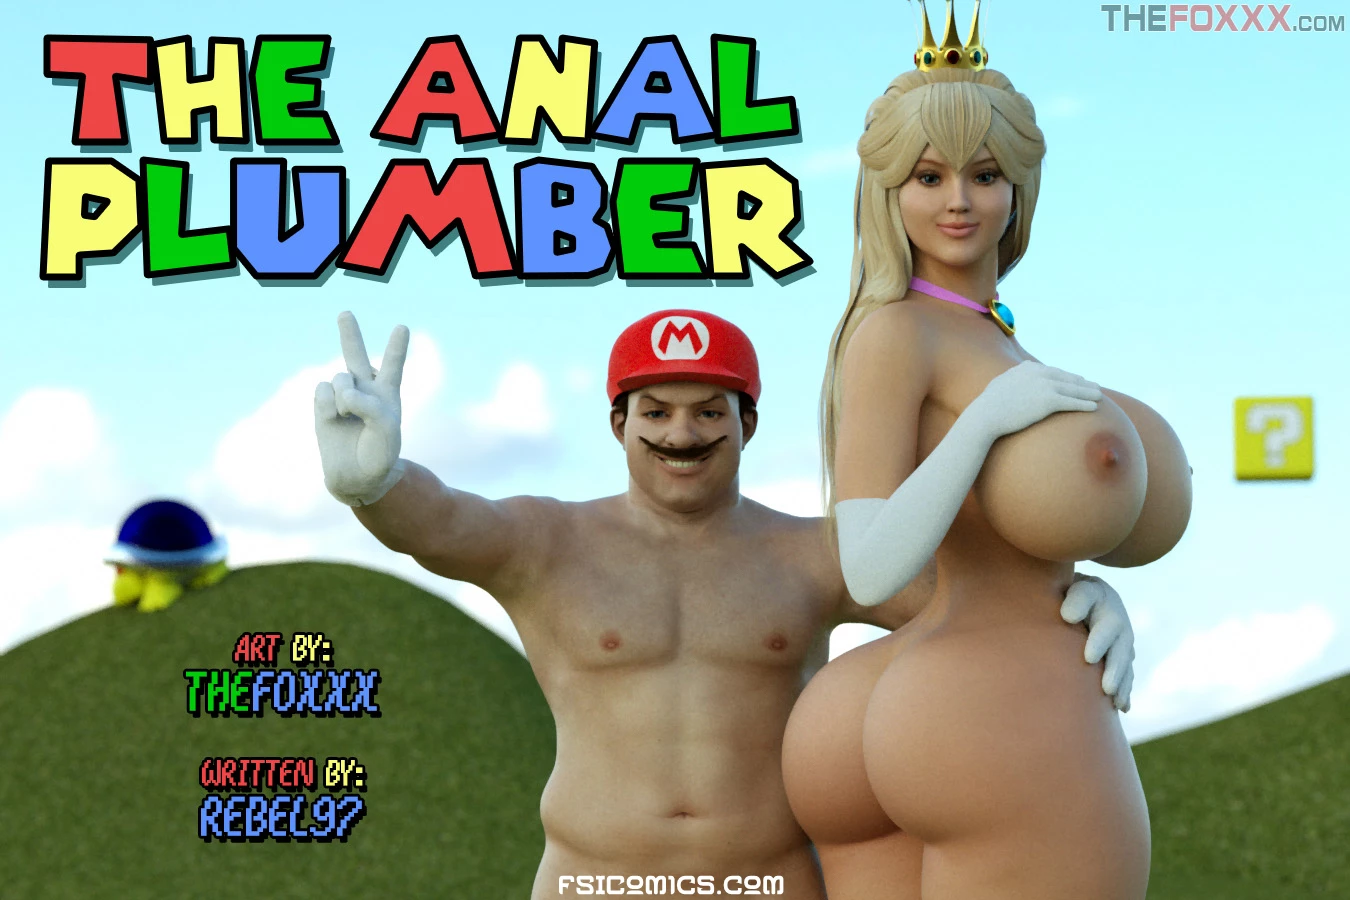 The Anal Plumber Chapter 1 – The FOXXX - 113 - FSIComics